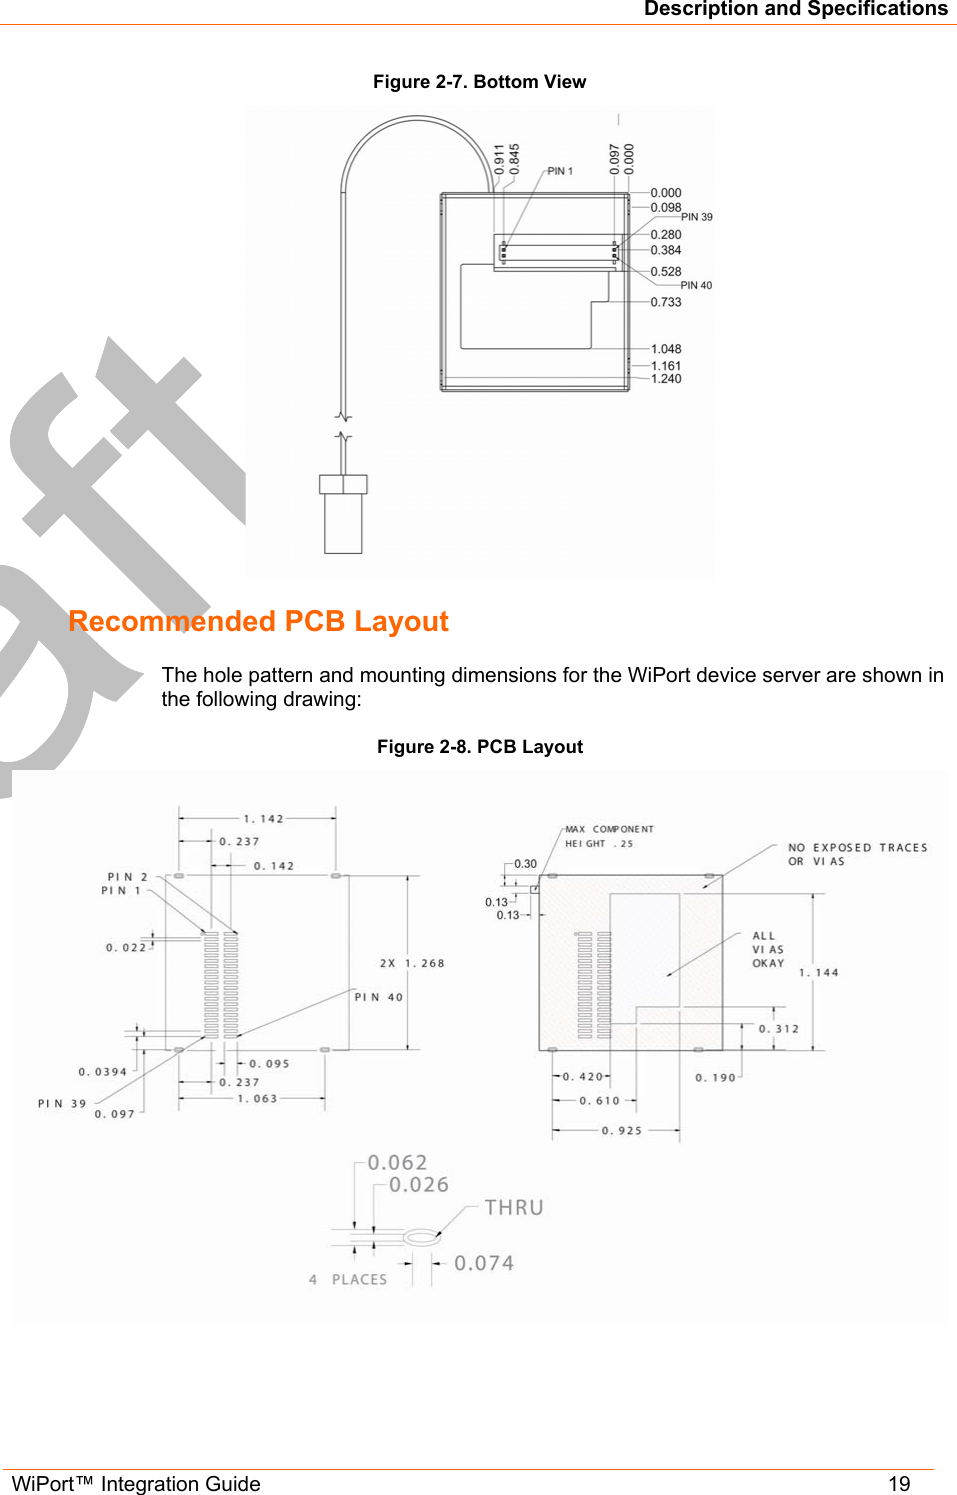 Description and Specifications WiPort™ Integration Guide   19 Figure 2-7. Bottom View  Recommended PCB Layout The hole pattern and mounting dimensions for the WiPort device server are shown in the following drawing: Figure 2-8. PCB Layout  